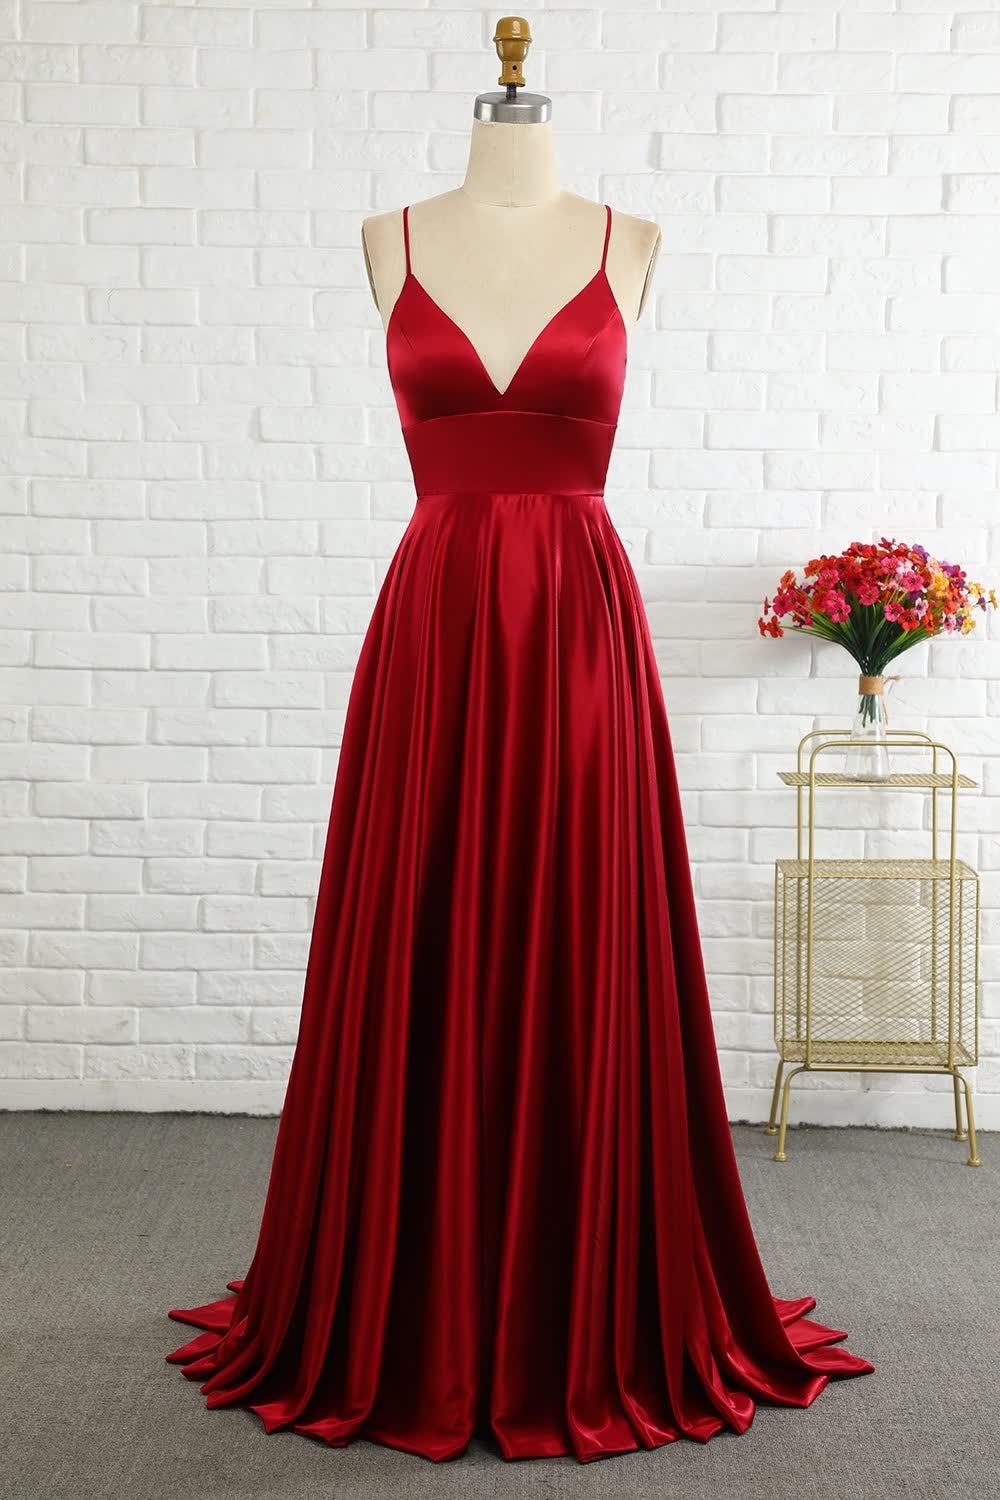 Simple A Line Spaghetti Straps Burgundy Long Corset Prom Dress with Cirss Cross Back Gowns, Simple A Line Spaghetti Straps Burgundy Long Prom Dress with Cirss Cross Back